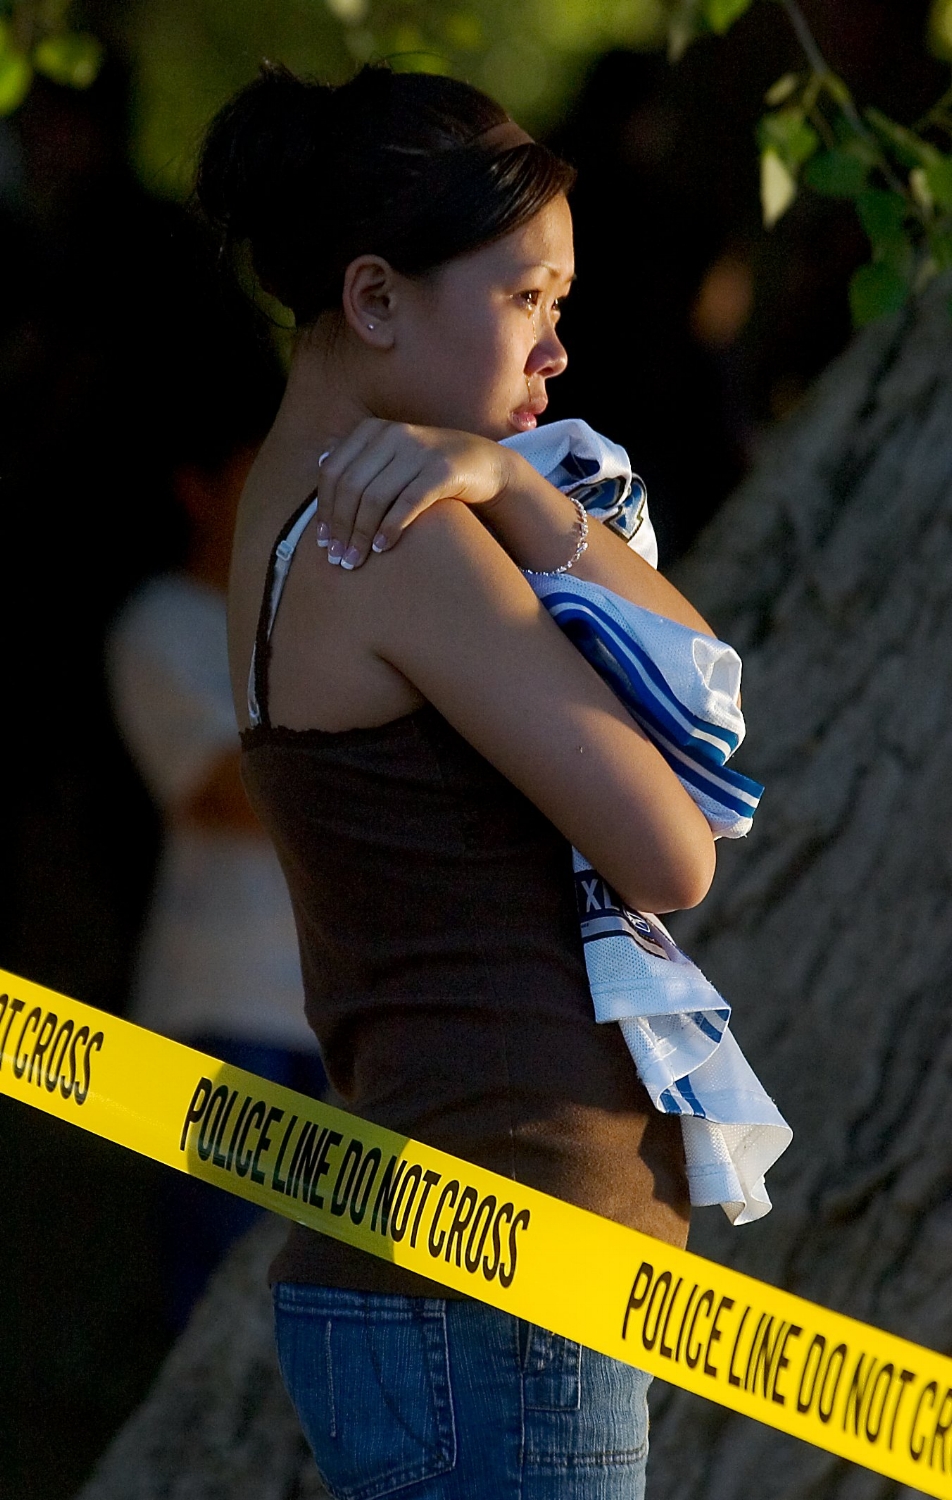  Julie Saeteurn 13, cries while she waits for law enforcement divers to recover the body of her boyfriend Jimmy Saeteurn from the river at Discovery Park in Sacramento on Thursday May 18, 2006. 